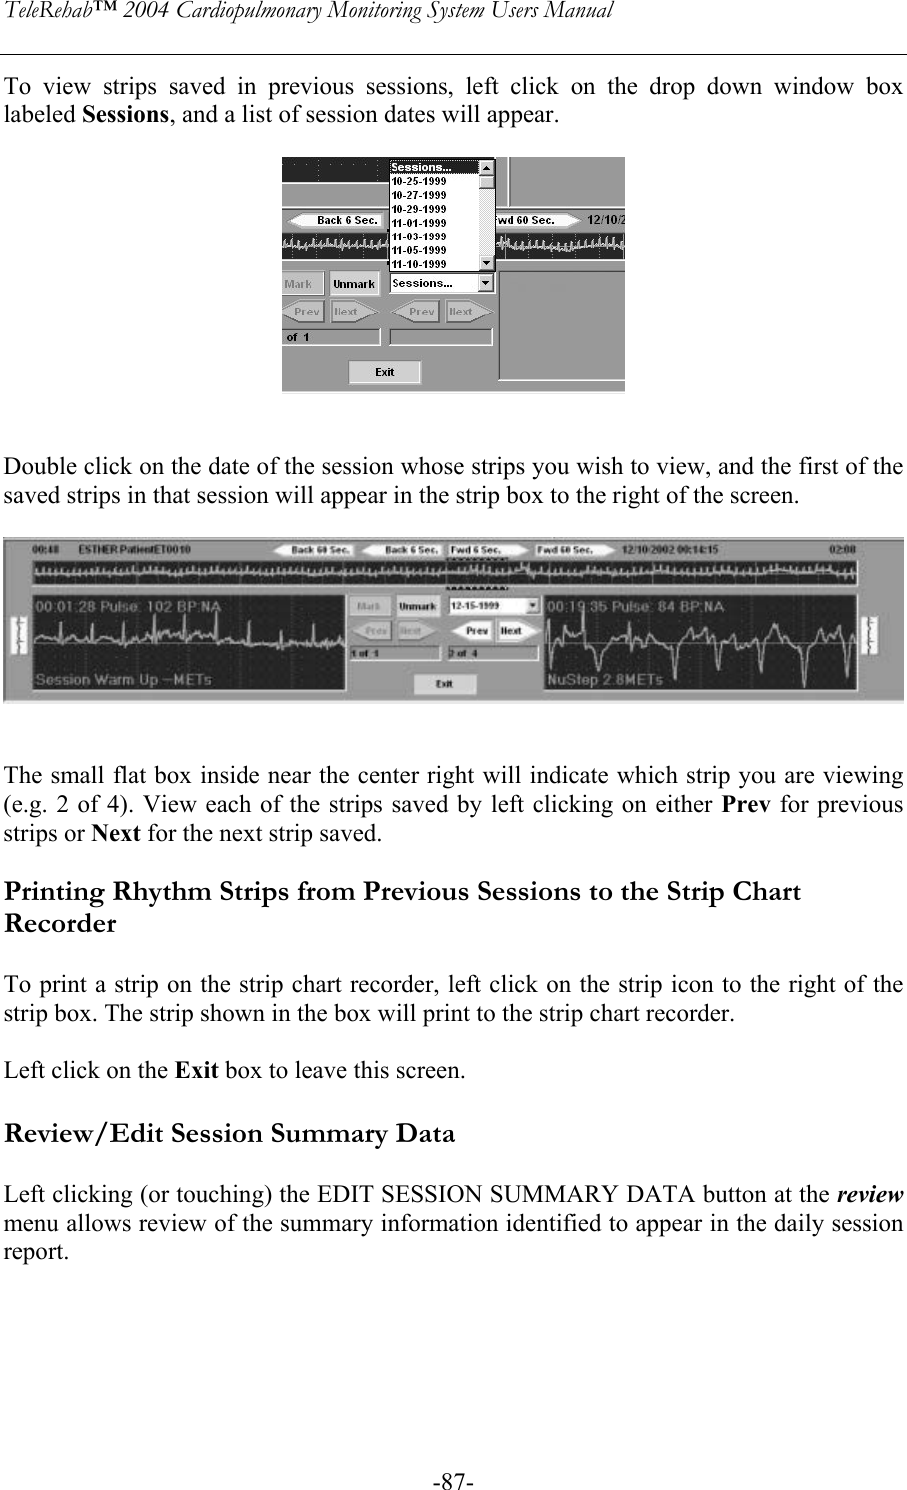 TeleRehab™ 2004 Cardiopulmonary Monitoring System Users Manual    -87-To view strips saved in previous sessions, left click on the drop down window box labeled Sessions, and a list of session dates will appear.     Double click on the date of the session whose strips you wish to view, and the first of the saved strips in that session will appear in the strip box to the right of the screen.     The small flat box inside near the center right will indicate which strip you are viewing (e.g. 2 of 4). View each of the strips saved by left clicking on either Prev for previous strips or Next for the next strip saved.  Printing Rhythm Strips from Previous Sessions to the Strip Chart Recorder  To print a strip on the strip chart recorder, left click on the strip icon to the right of the strip box. The strip shown in the box will print to the strip chart recorder.  Left click on the Exit box to leave this screen.  Review/Edit Session Summary Data  Left clicking (or touching) the EDIT SESSION SUMMARY DATA button at the review menu allows review of the summary information identified to appear in the daily session report.   